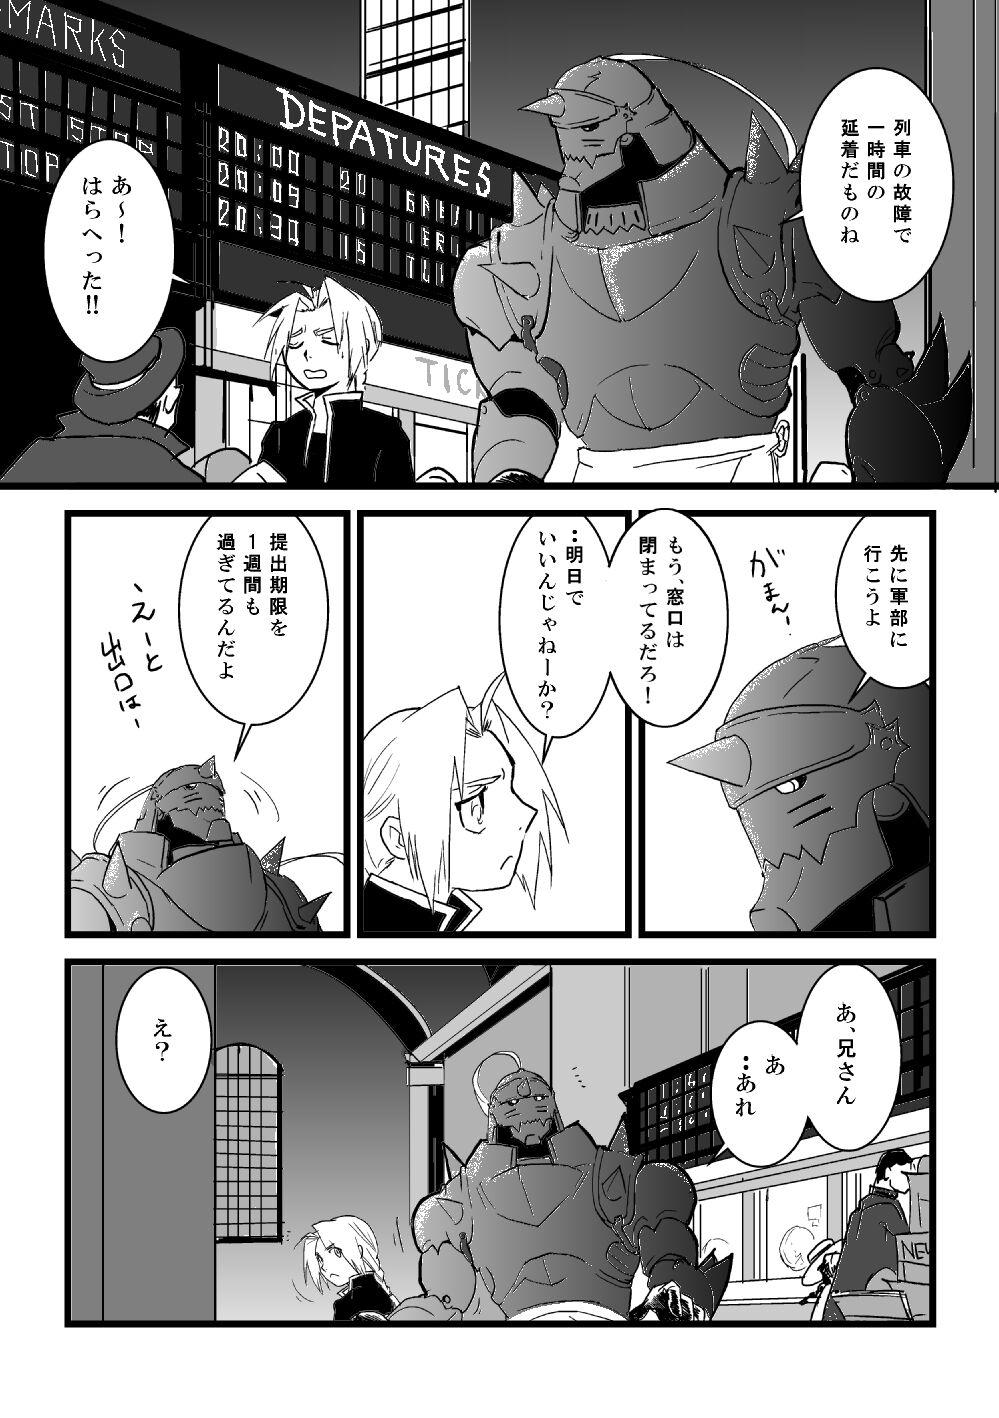 Pussy Play The Second Time - Fullmetal alchemist | hagane no renkinjutsushi Stepdaughter - Page 6